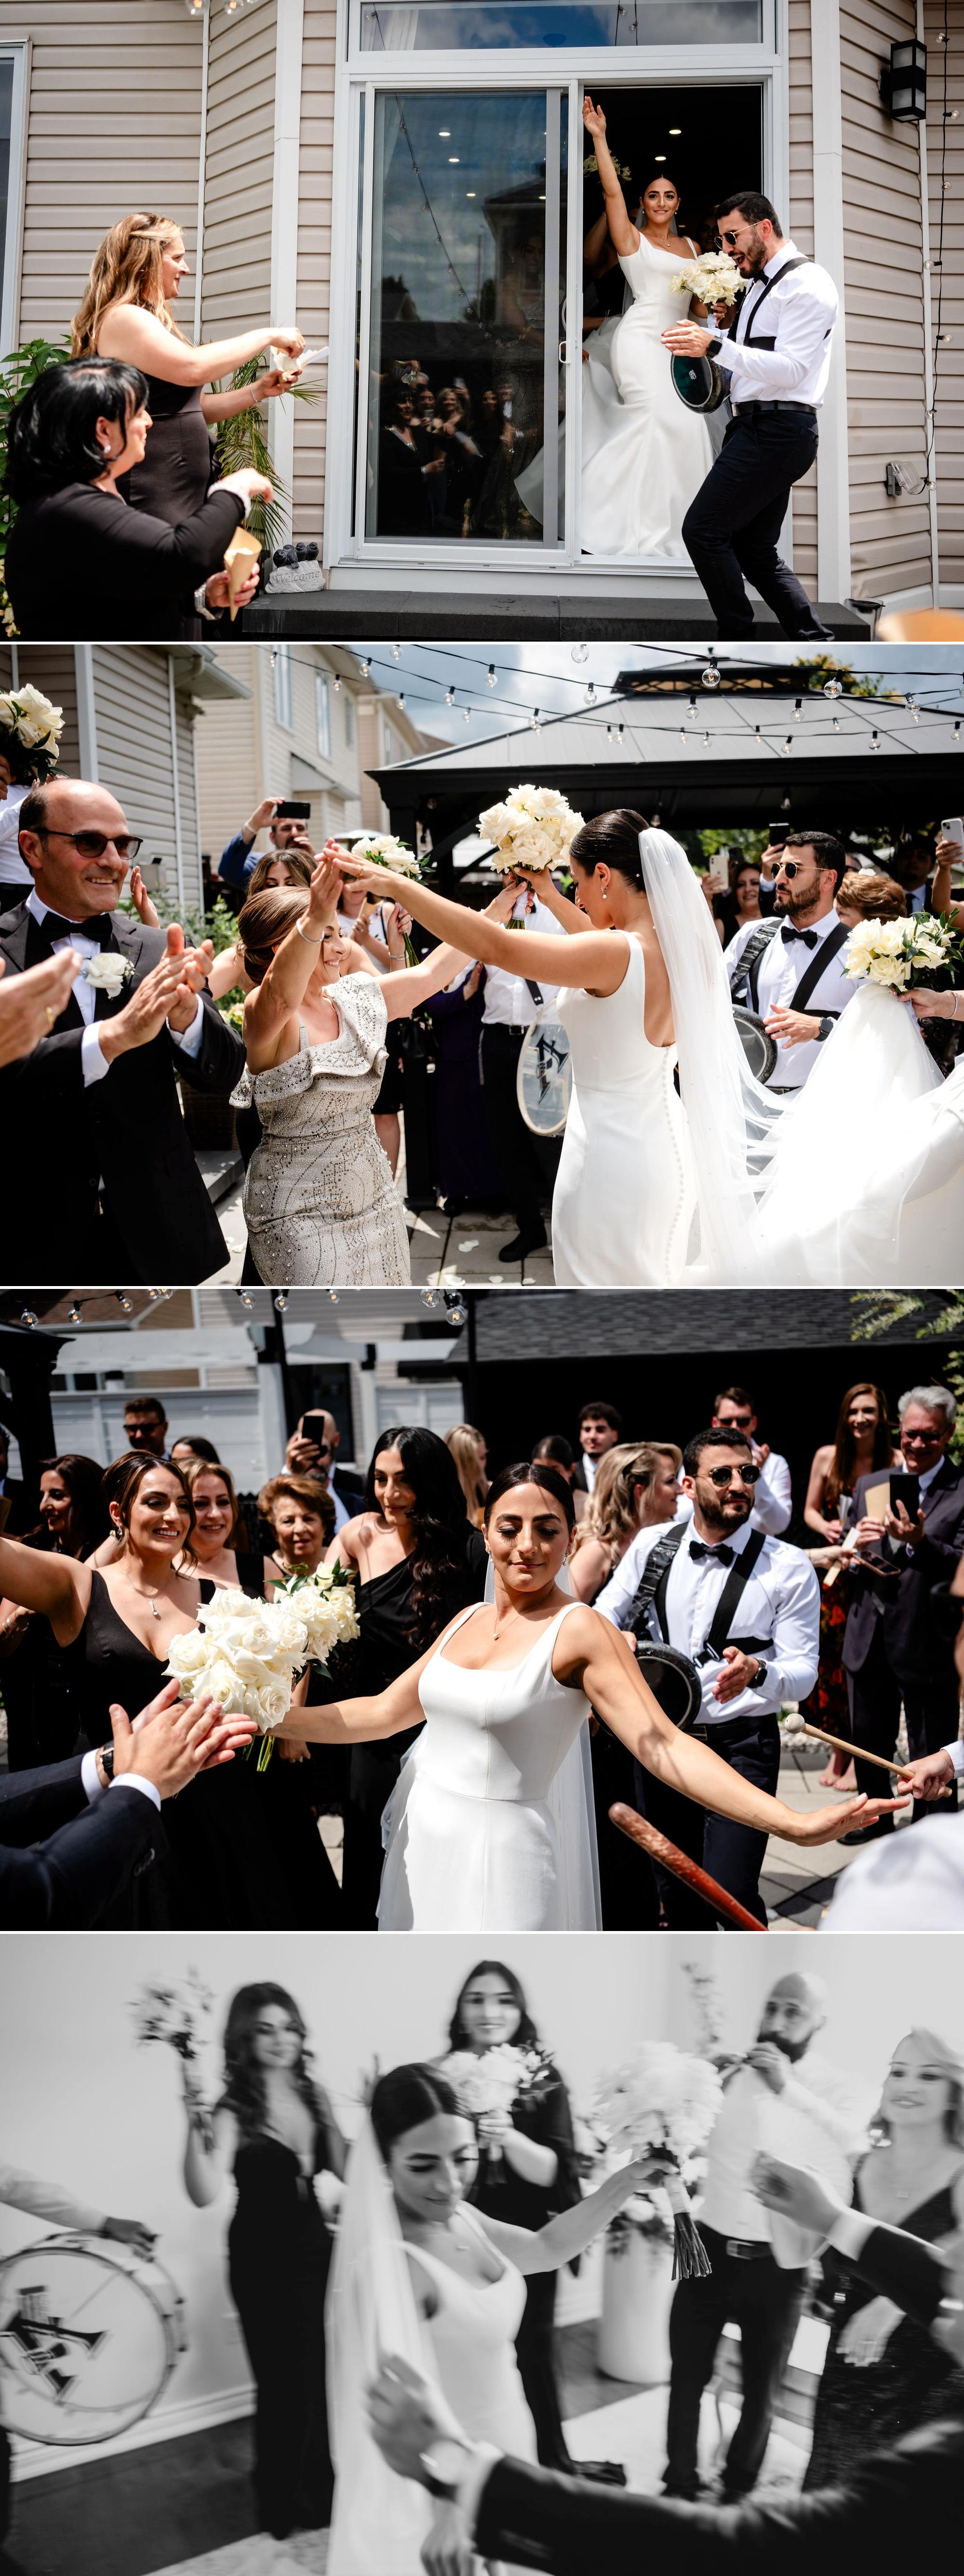 photos of a Lebanese bride leaving her home for her wedding ceremony